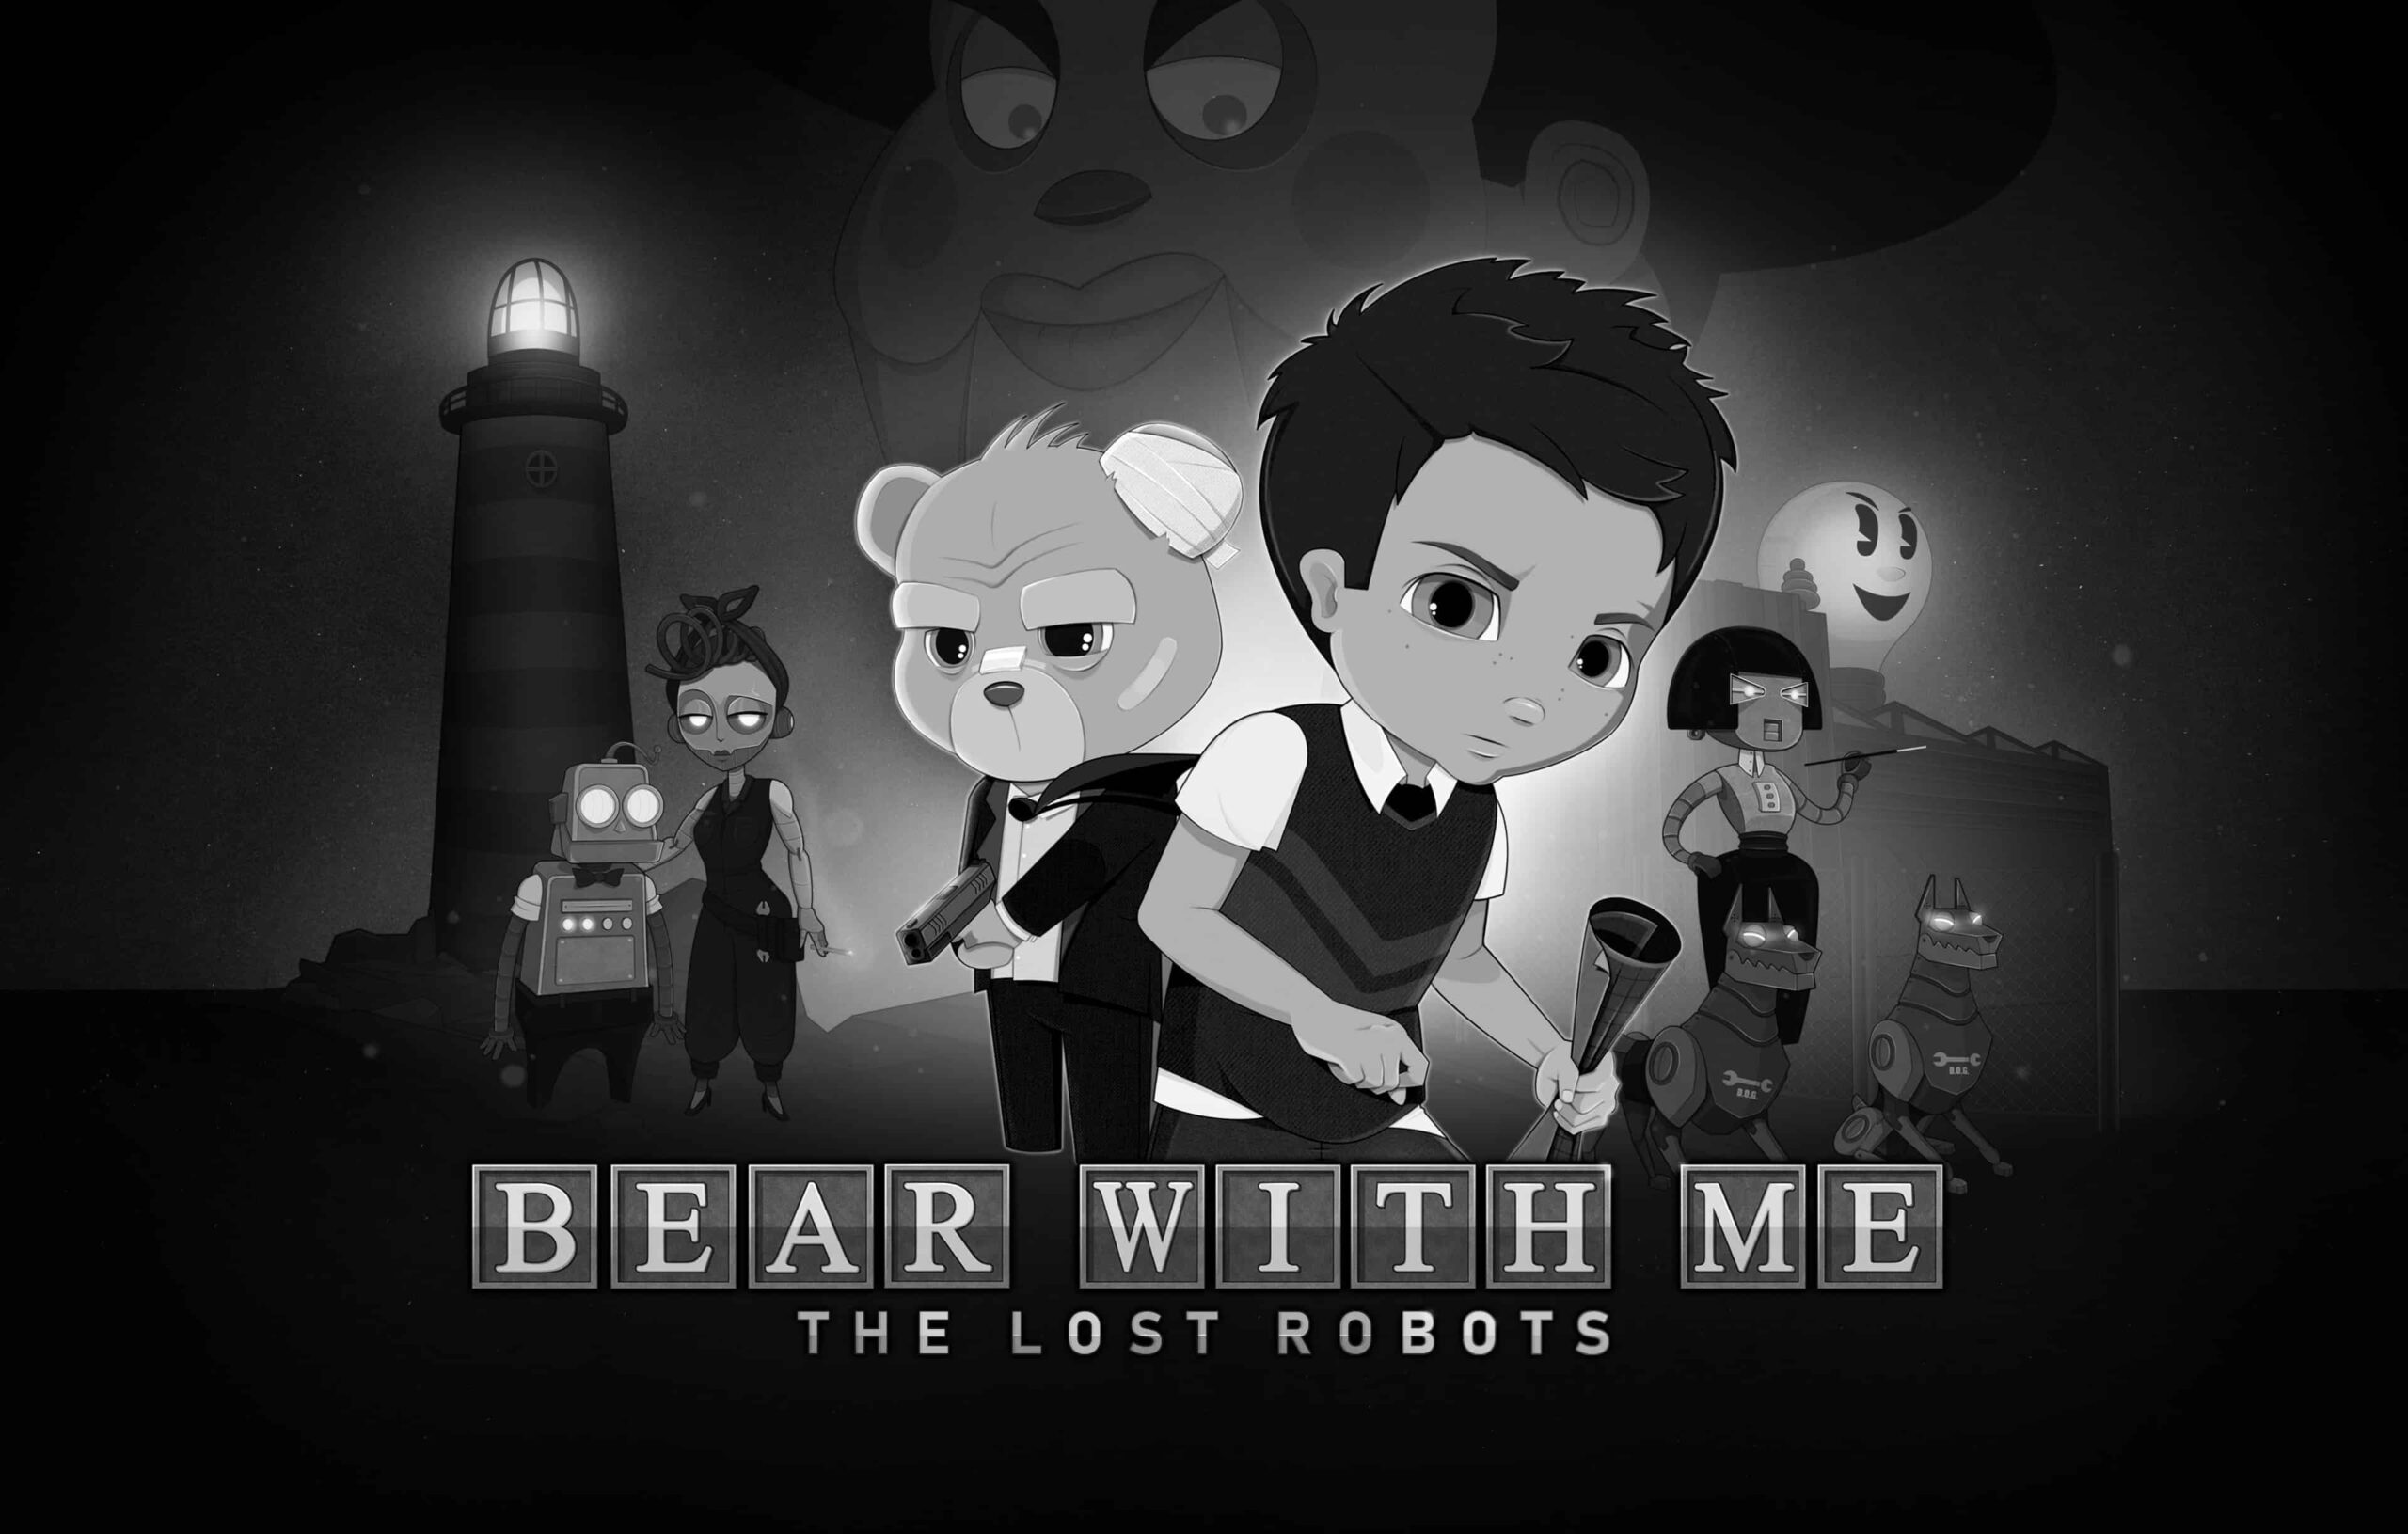 Bear With Me The Lost Robots PC Version Full Game Free Download scaled